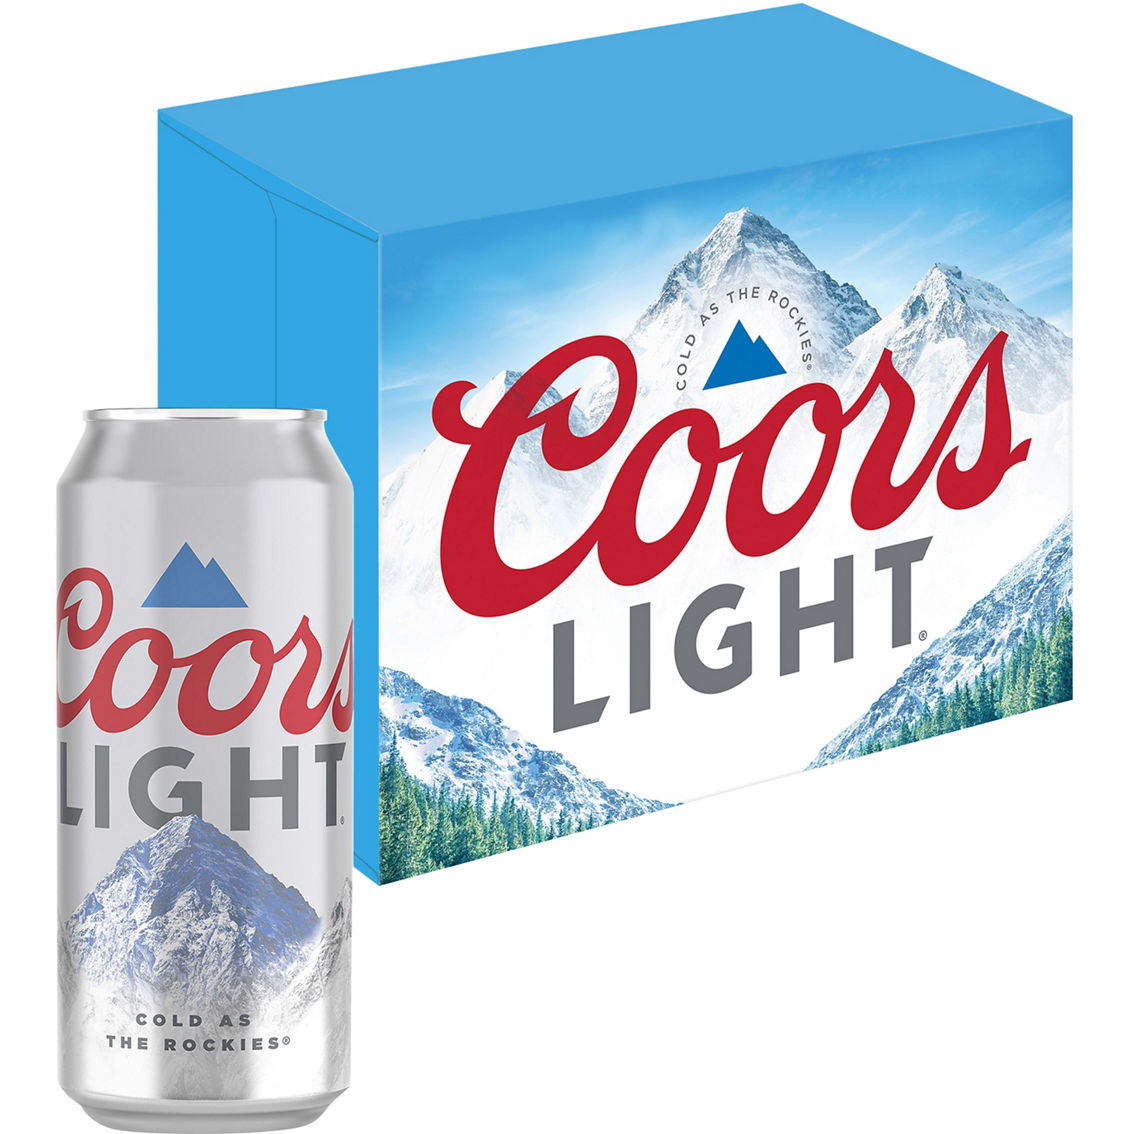 Coors Light 12 pk., 16 oz. Cans - Image 2 of 2